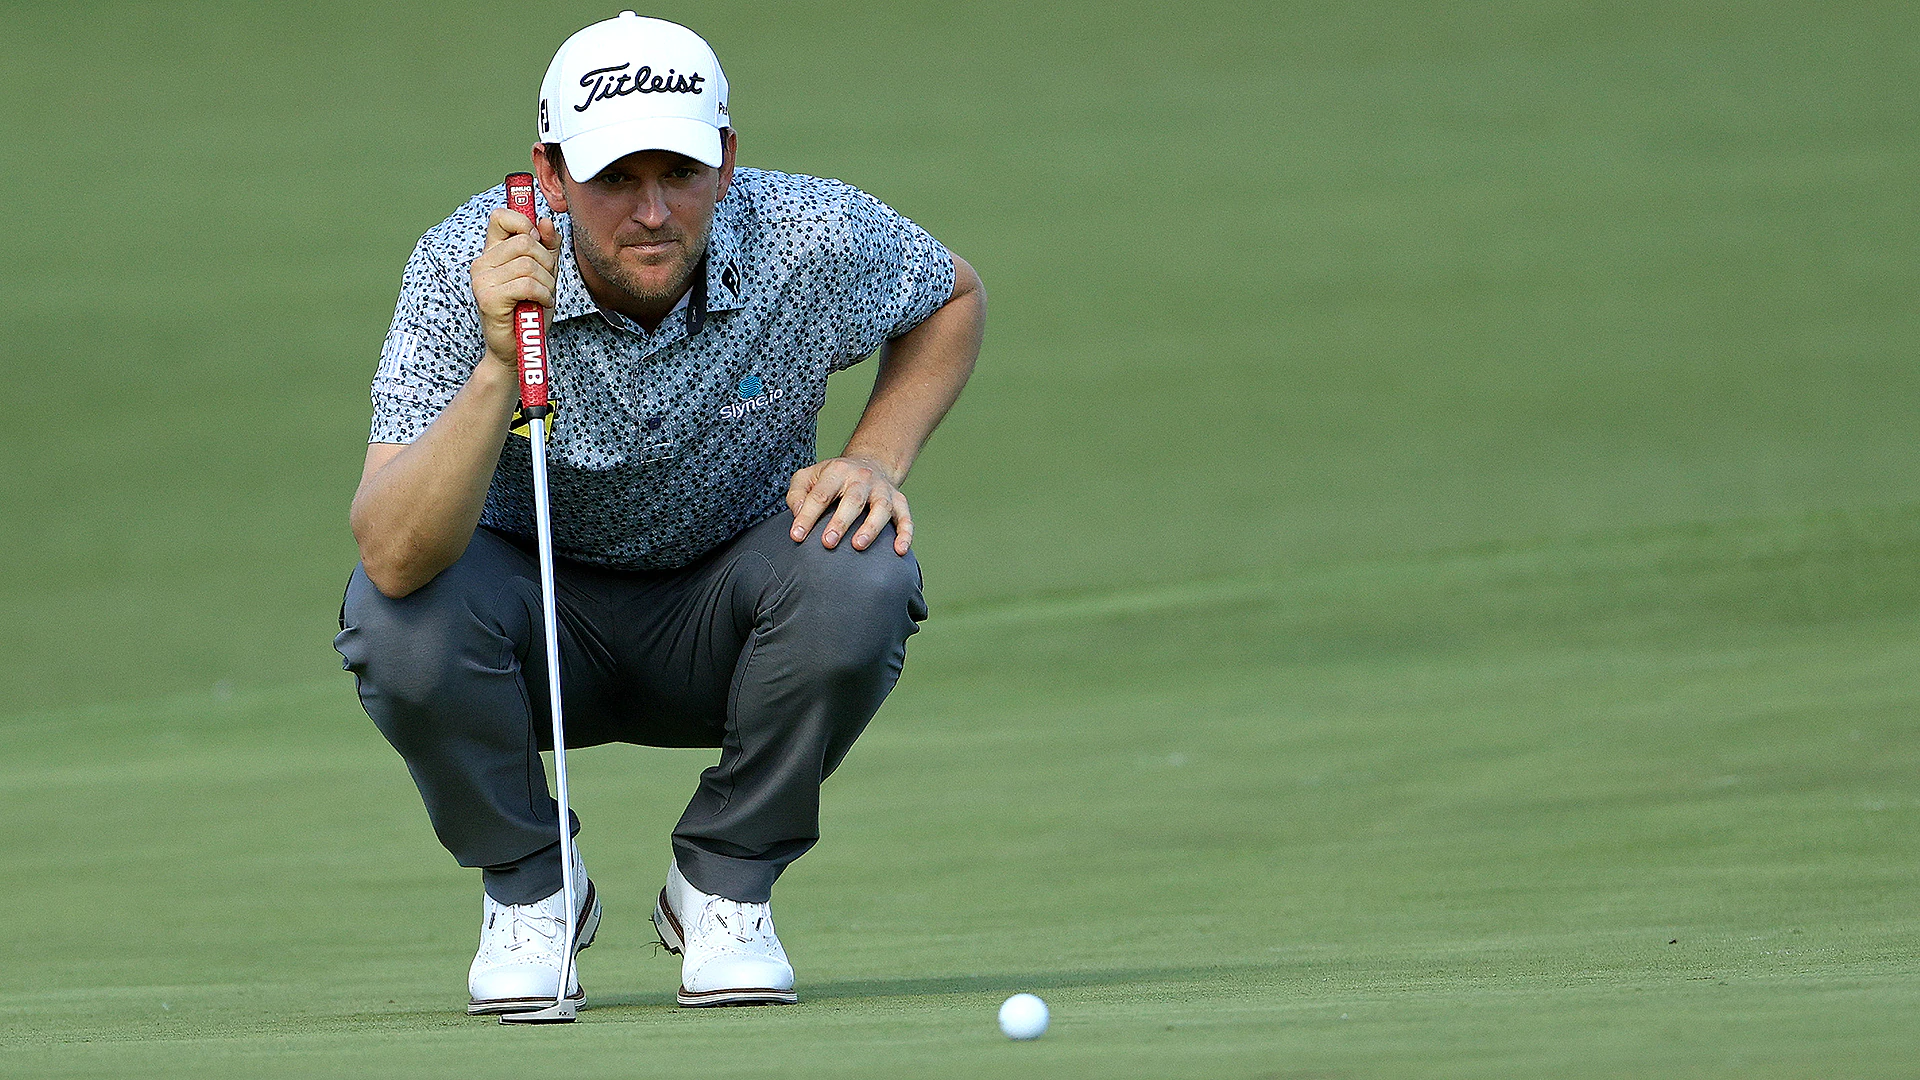 Watch: Bernd Wiesberger has eagle putt at 15th … and putts ball into the water